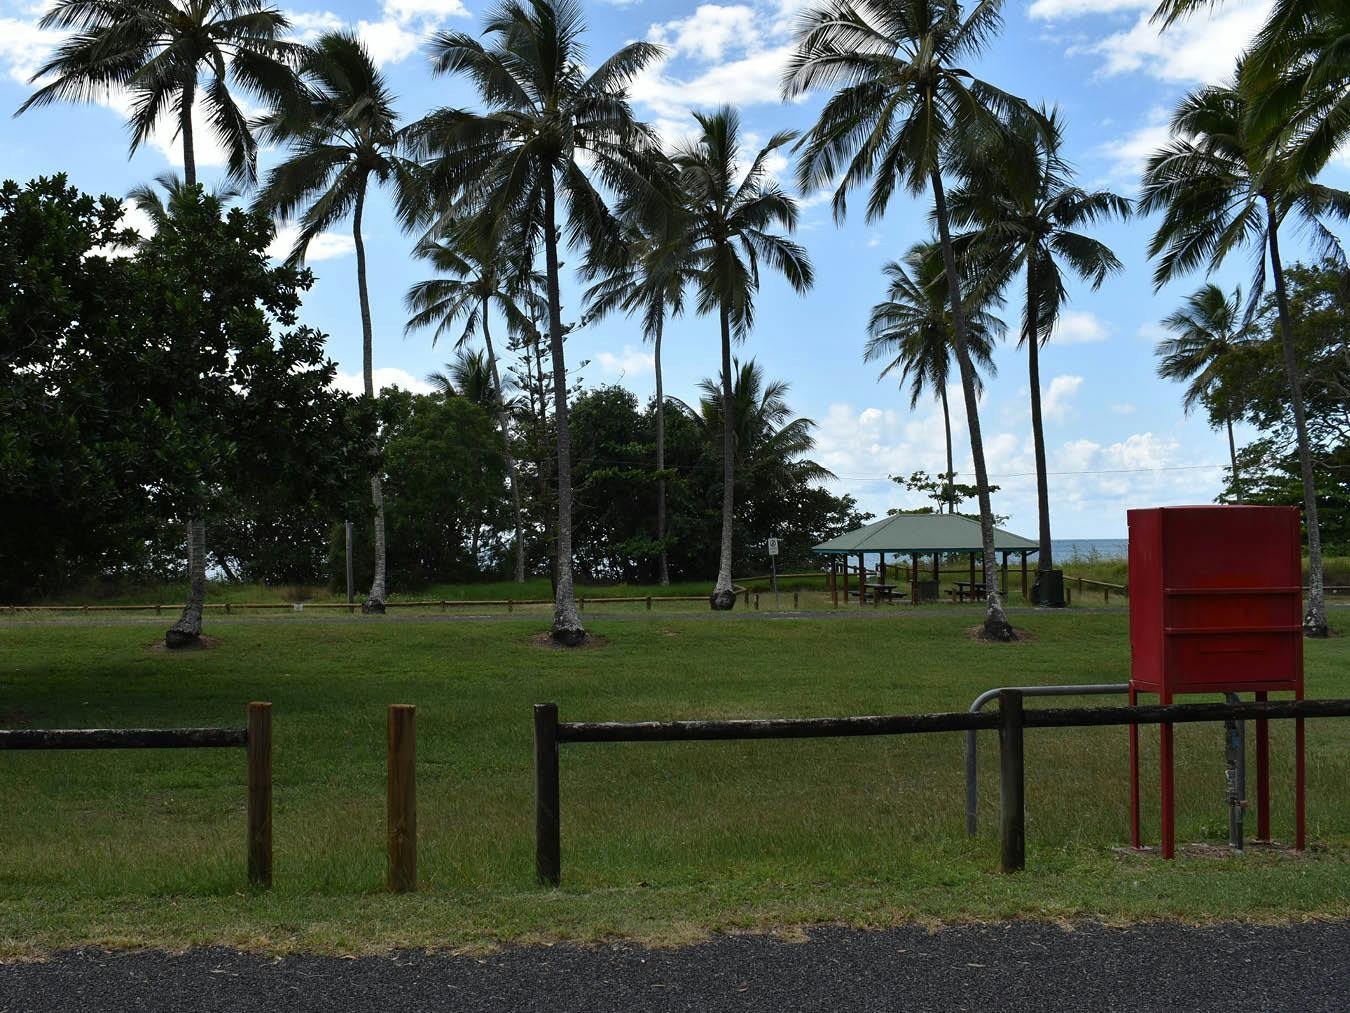 Intersection 2 – Seaforth Esplanade Road. This photograph is looking north towards the beach. A picnic shelter can be seen to the right.